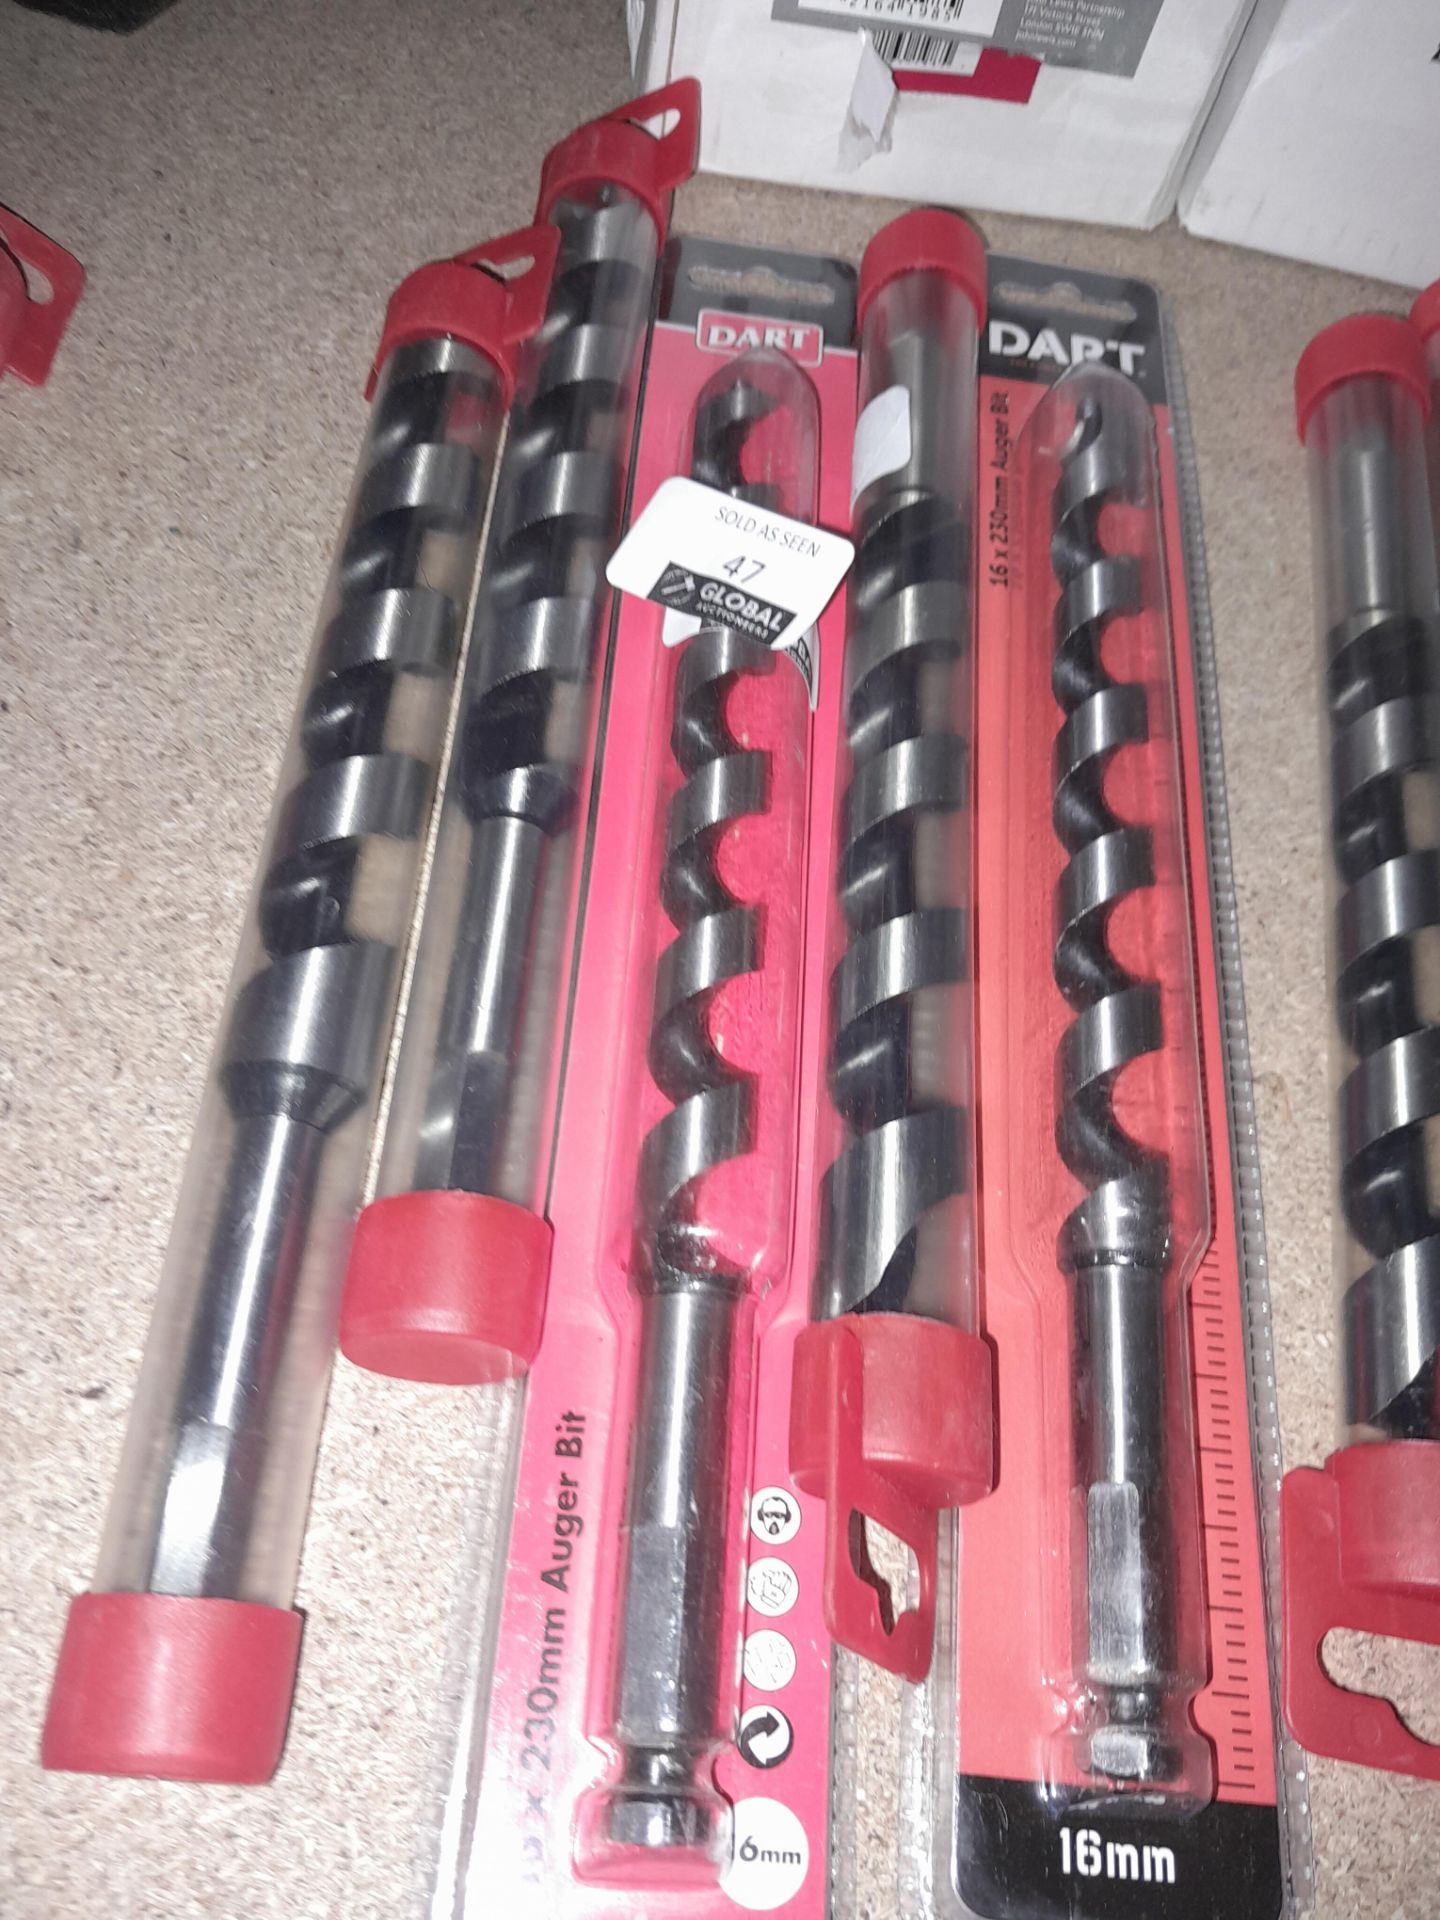 RRP £150 Brand New X5 Assorted Dart Auger Bits Including 16Mm - Image 2 of 2